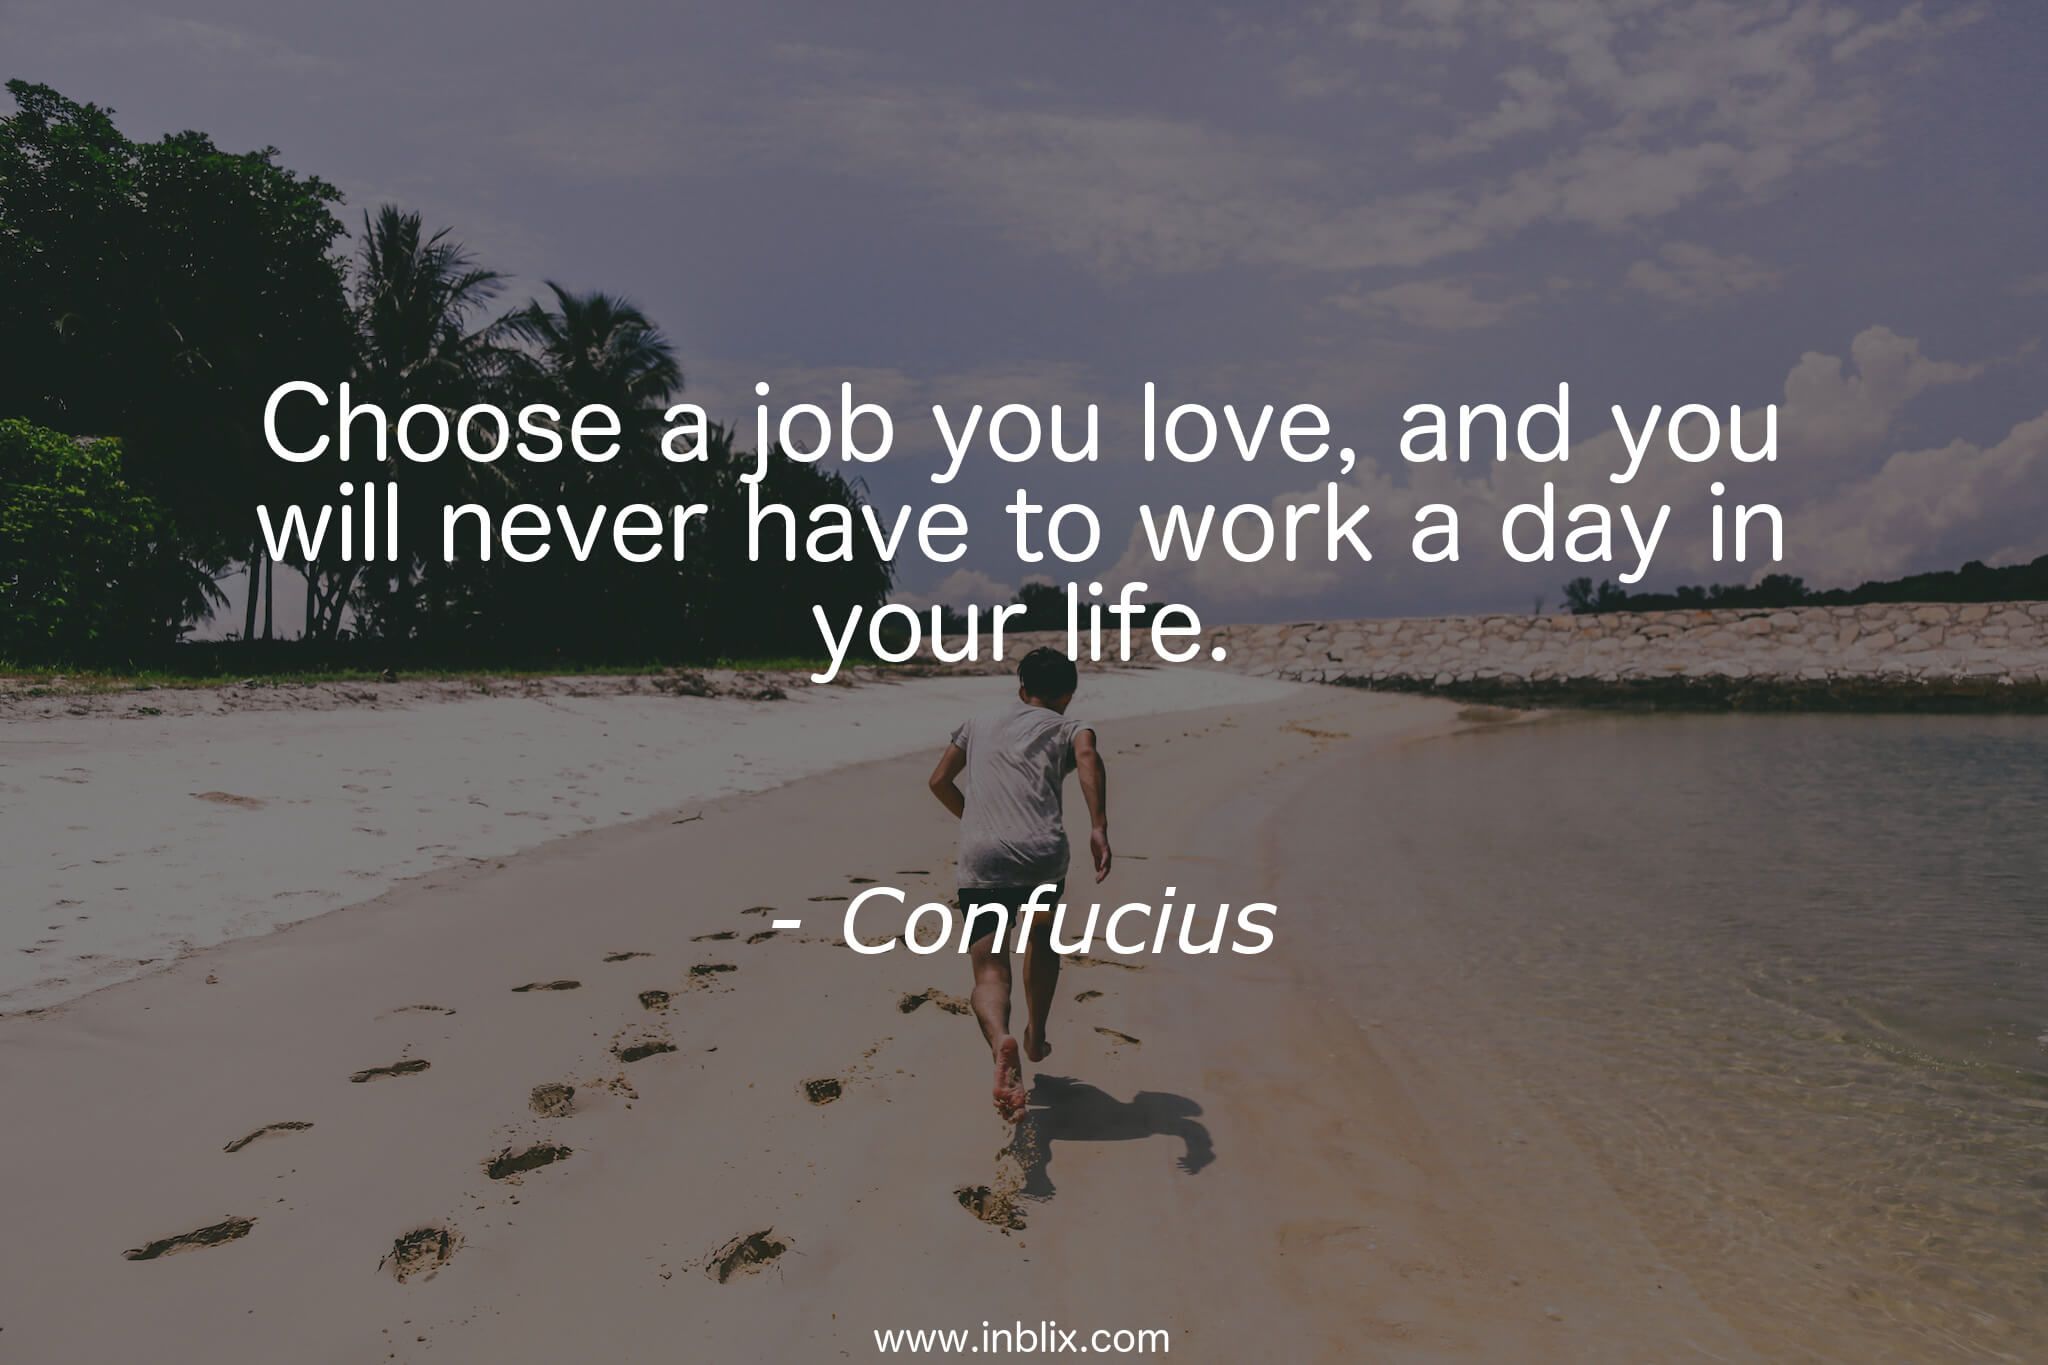 Are you leaving your life. Choose a job you Love, and you will never have to work a Day in your Life. Choose a job you Love. Day in your Life. You will never.